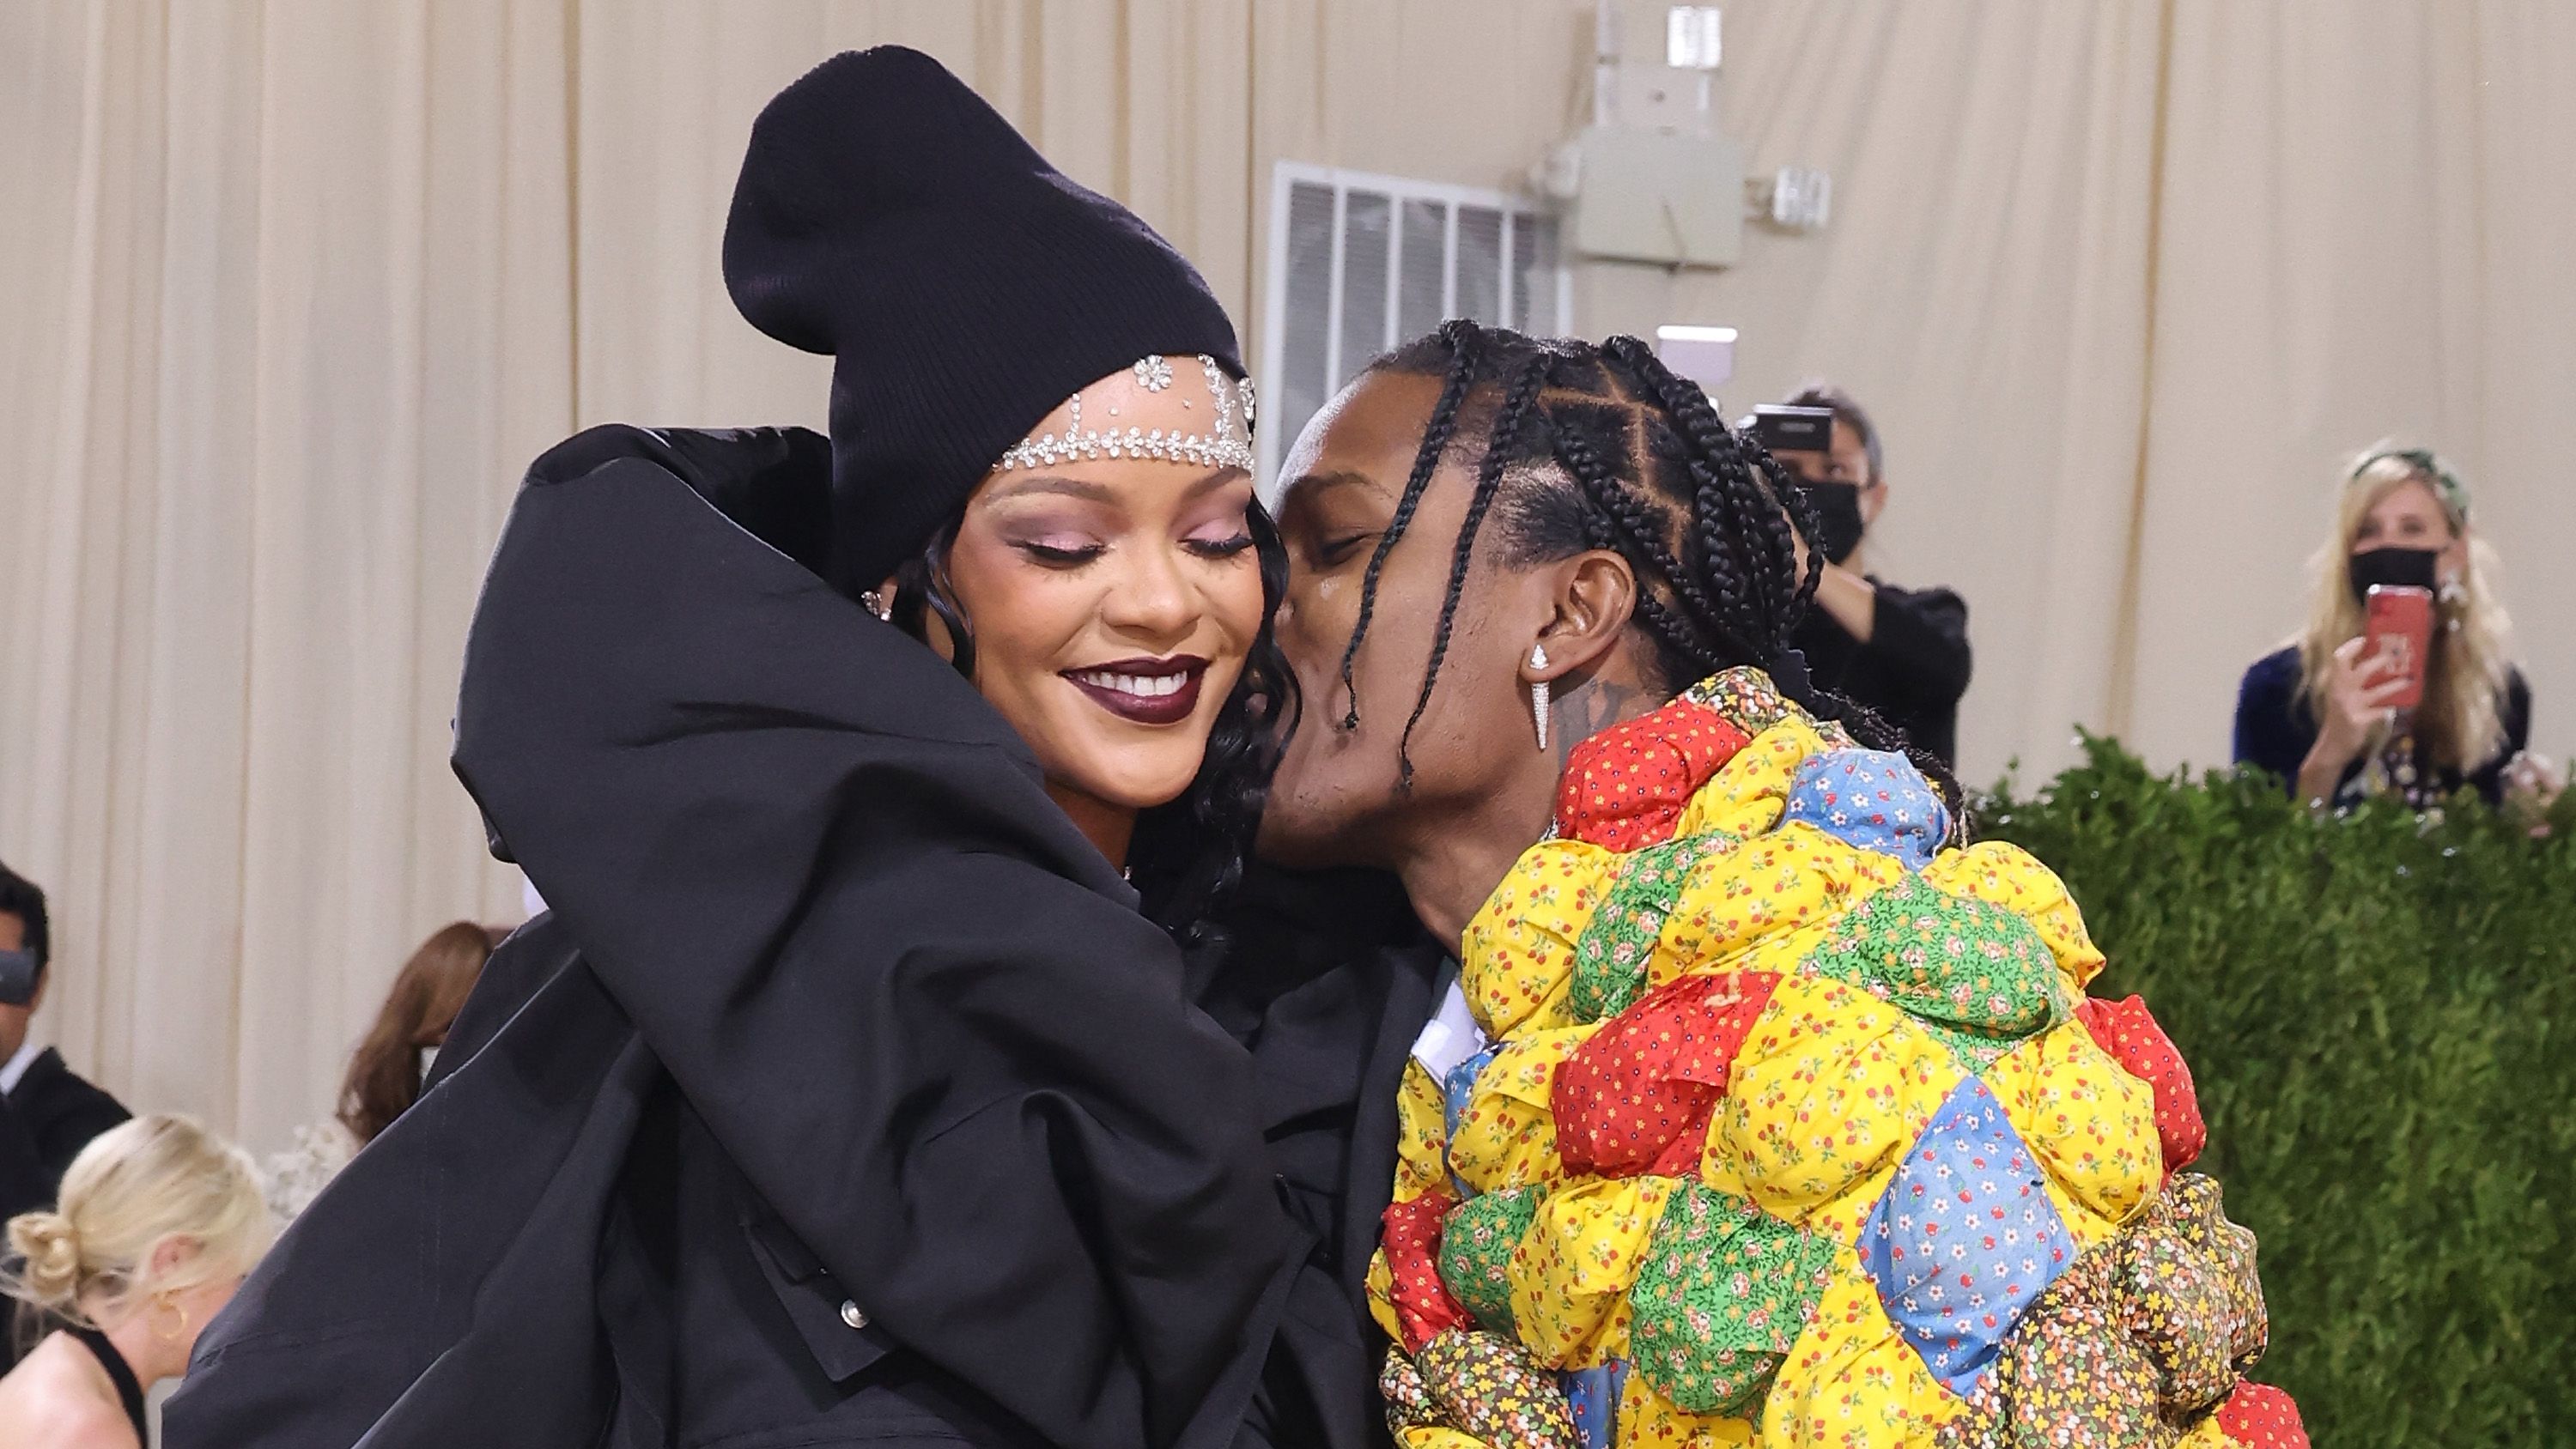 Rihanna reportedly welcomed baby No. 2 with ASAP Rocky